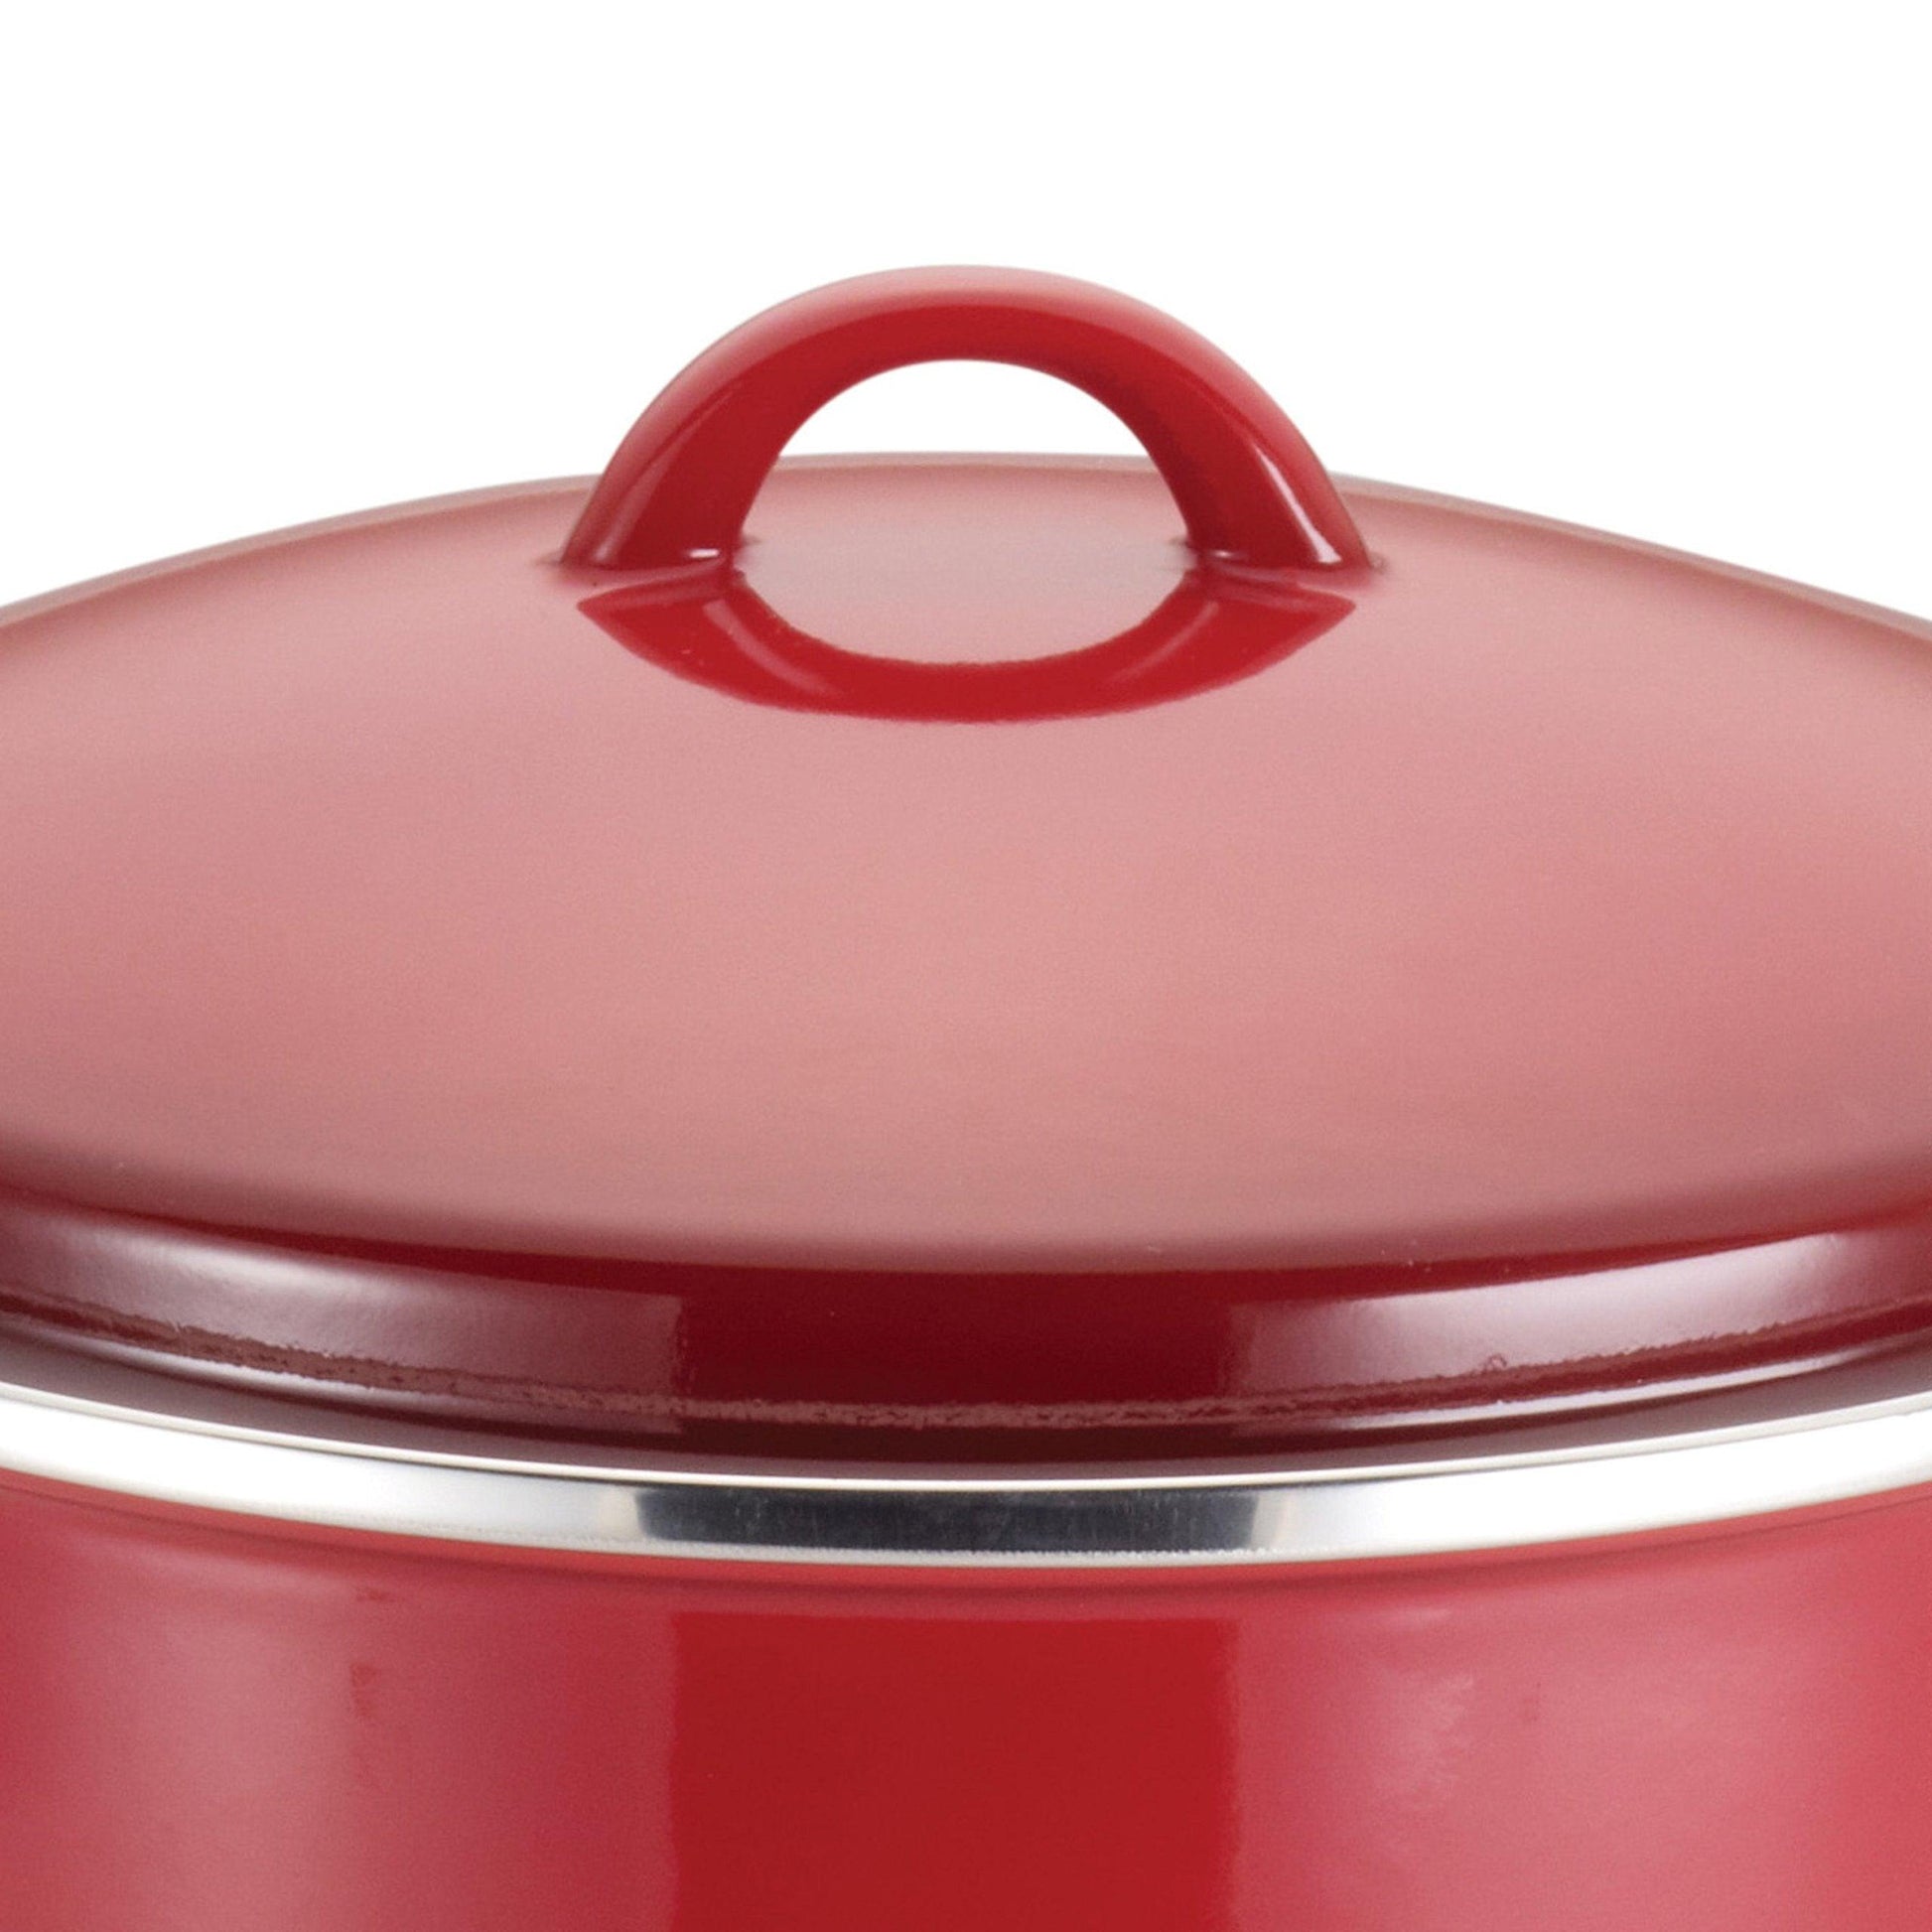 Rachael Ray Enamel on Steel Stock Pot/Stockpot with Lid, 12 Quart, Red Gradient - CookCave